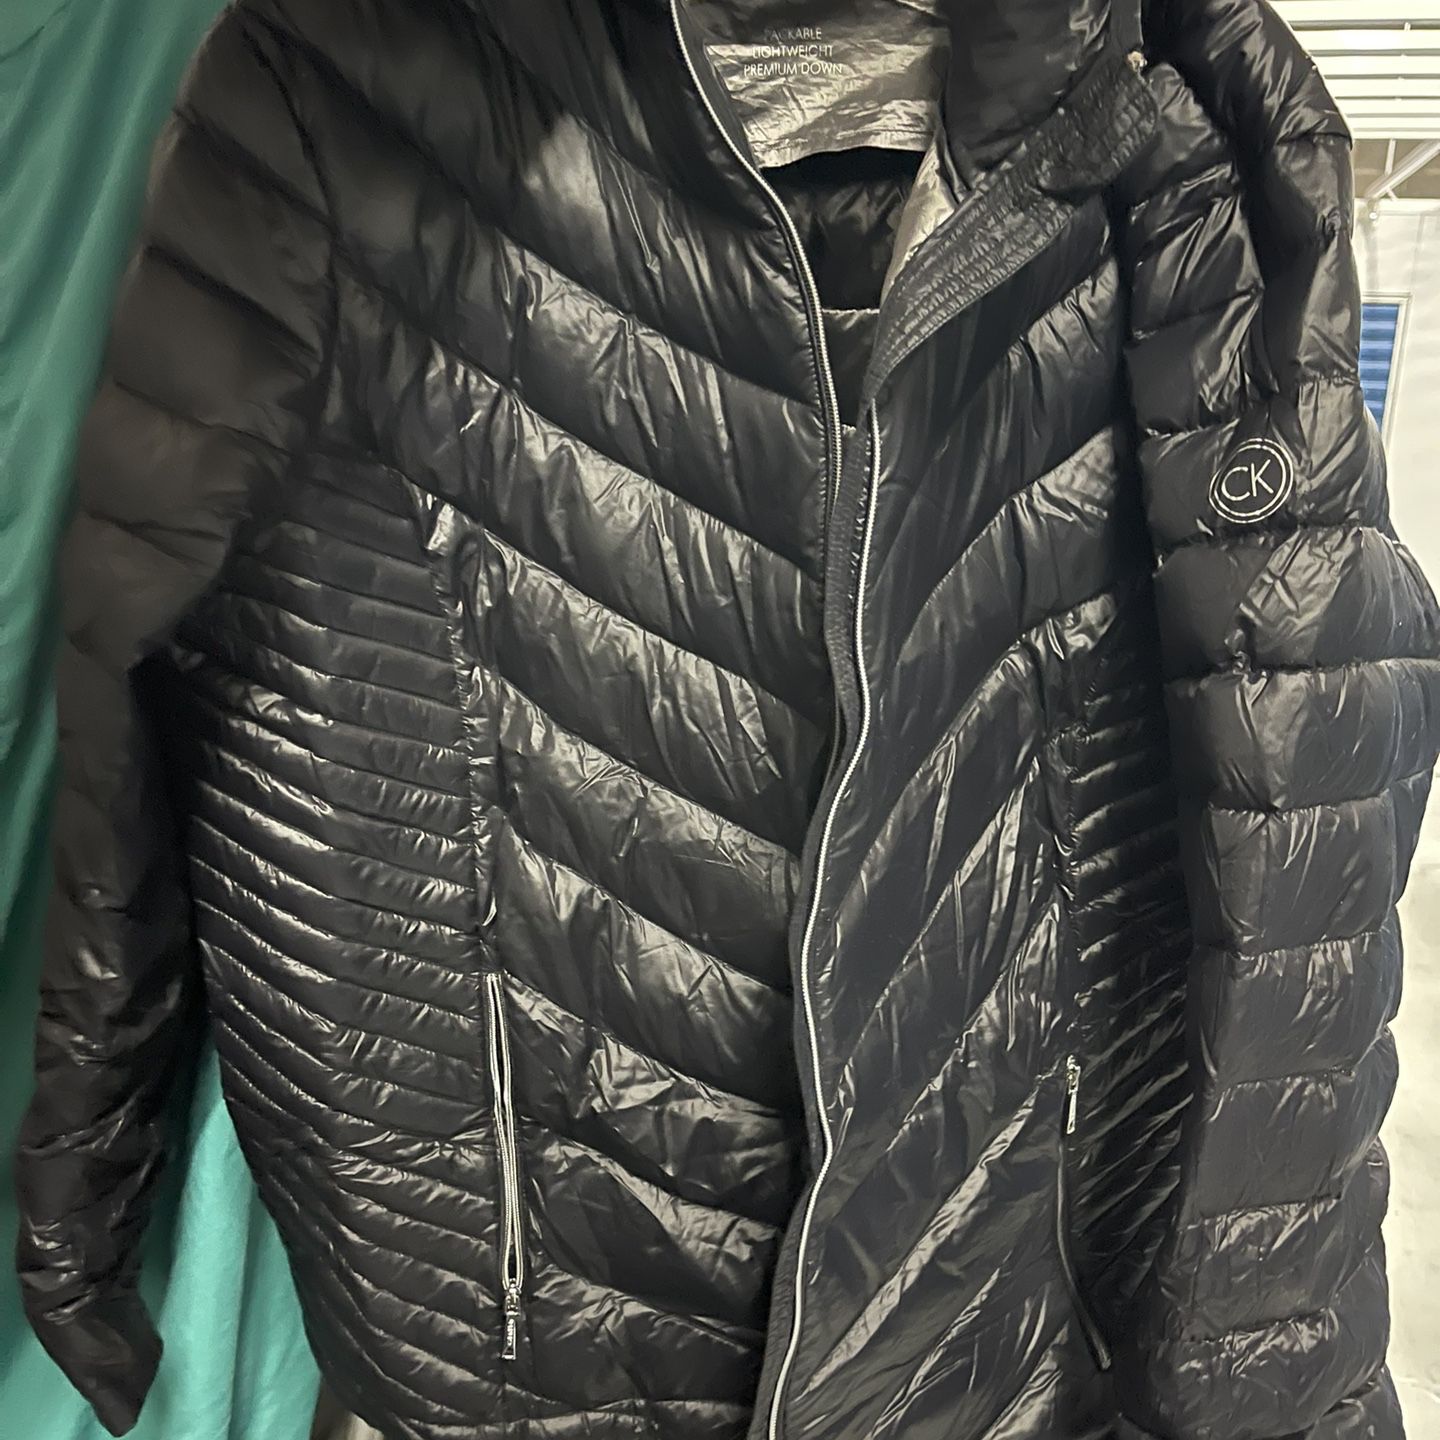 Calvin Klein Packable Lightweight Premium Down Puffer Jacket Women's 2 X  Black for Sale in Brooklyn, NY - OfferUp